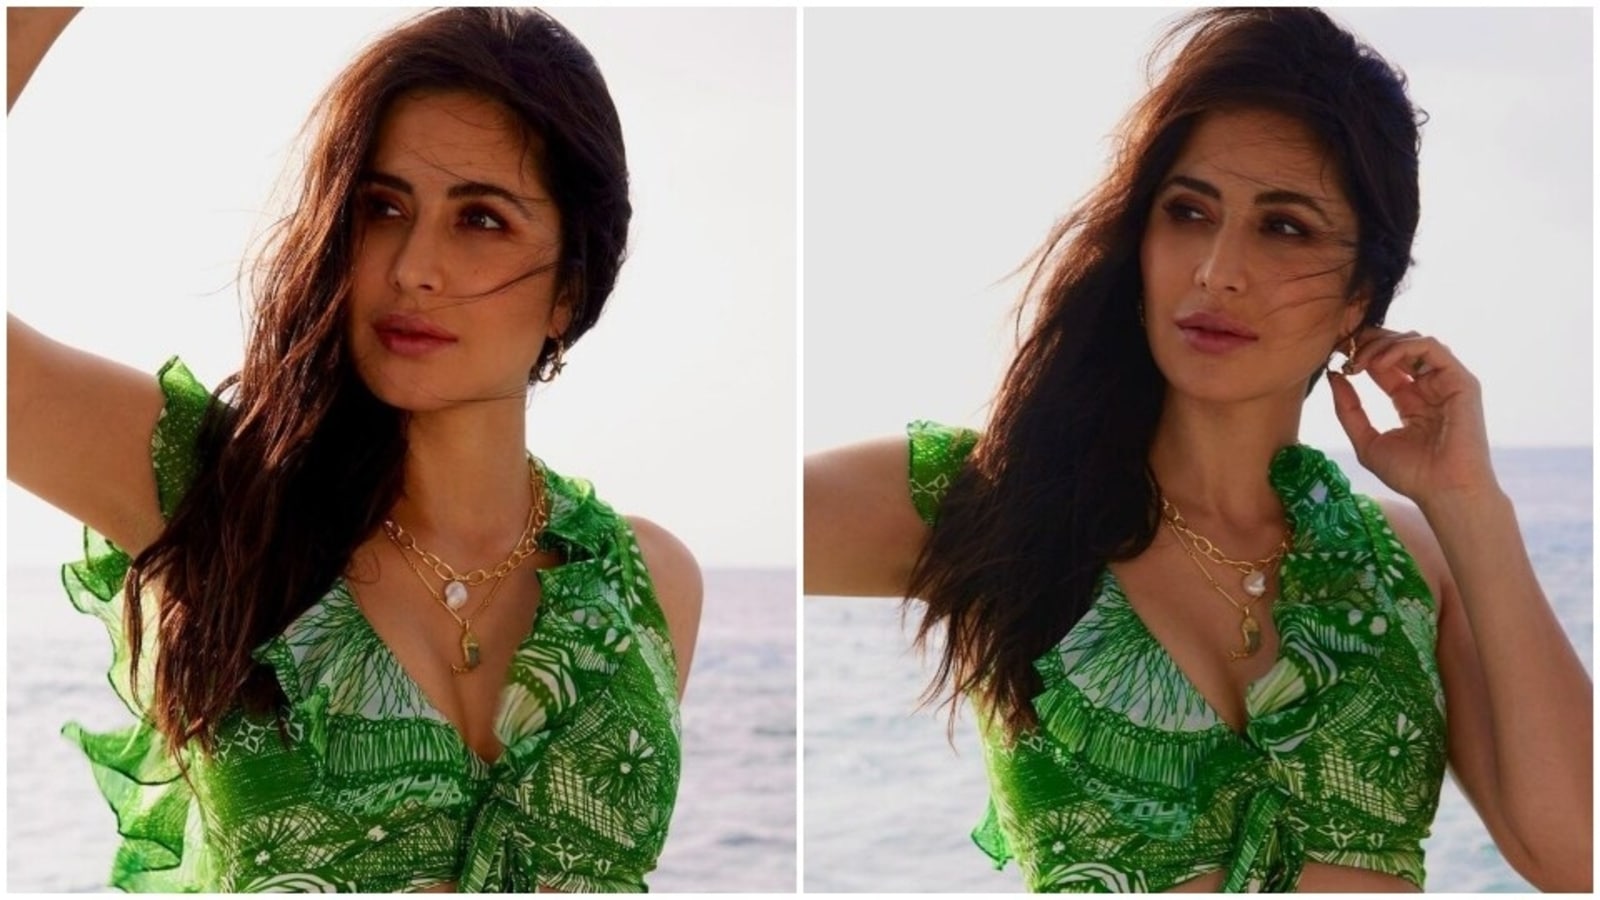 Katrina Kaif is a beach babe as she poses in printed crop top and thigh-slit skirt: Check out new pics